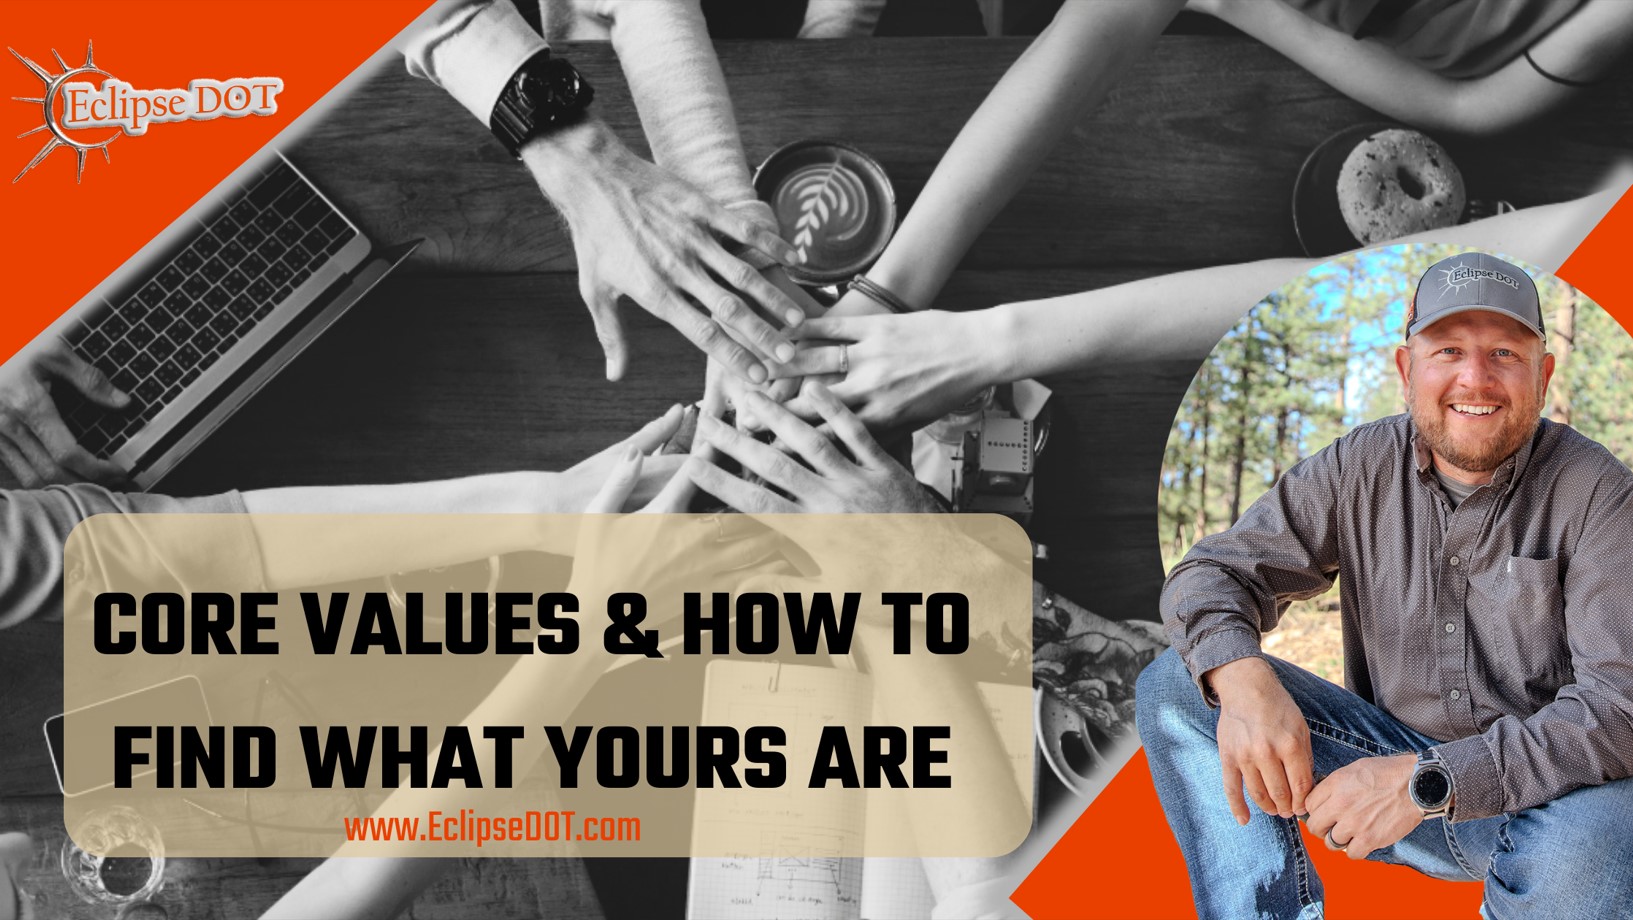 Discover the essence of Core Values and learn how to identify yours for personal growth.